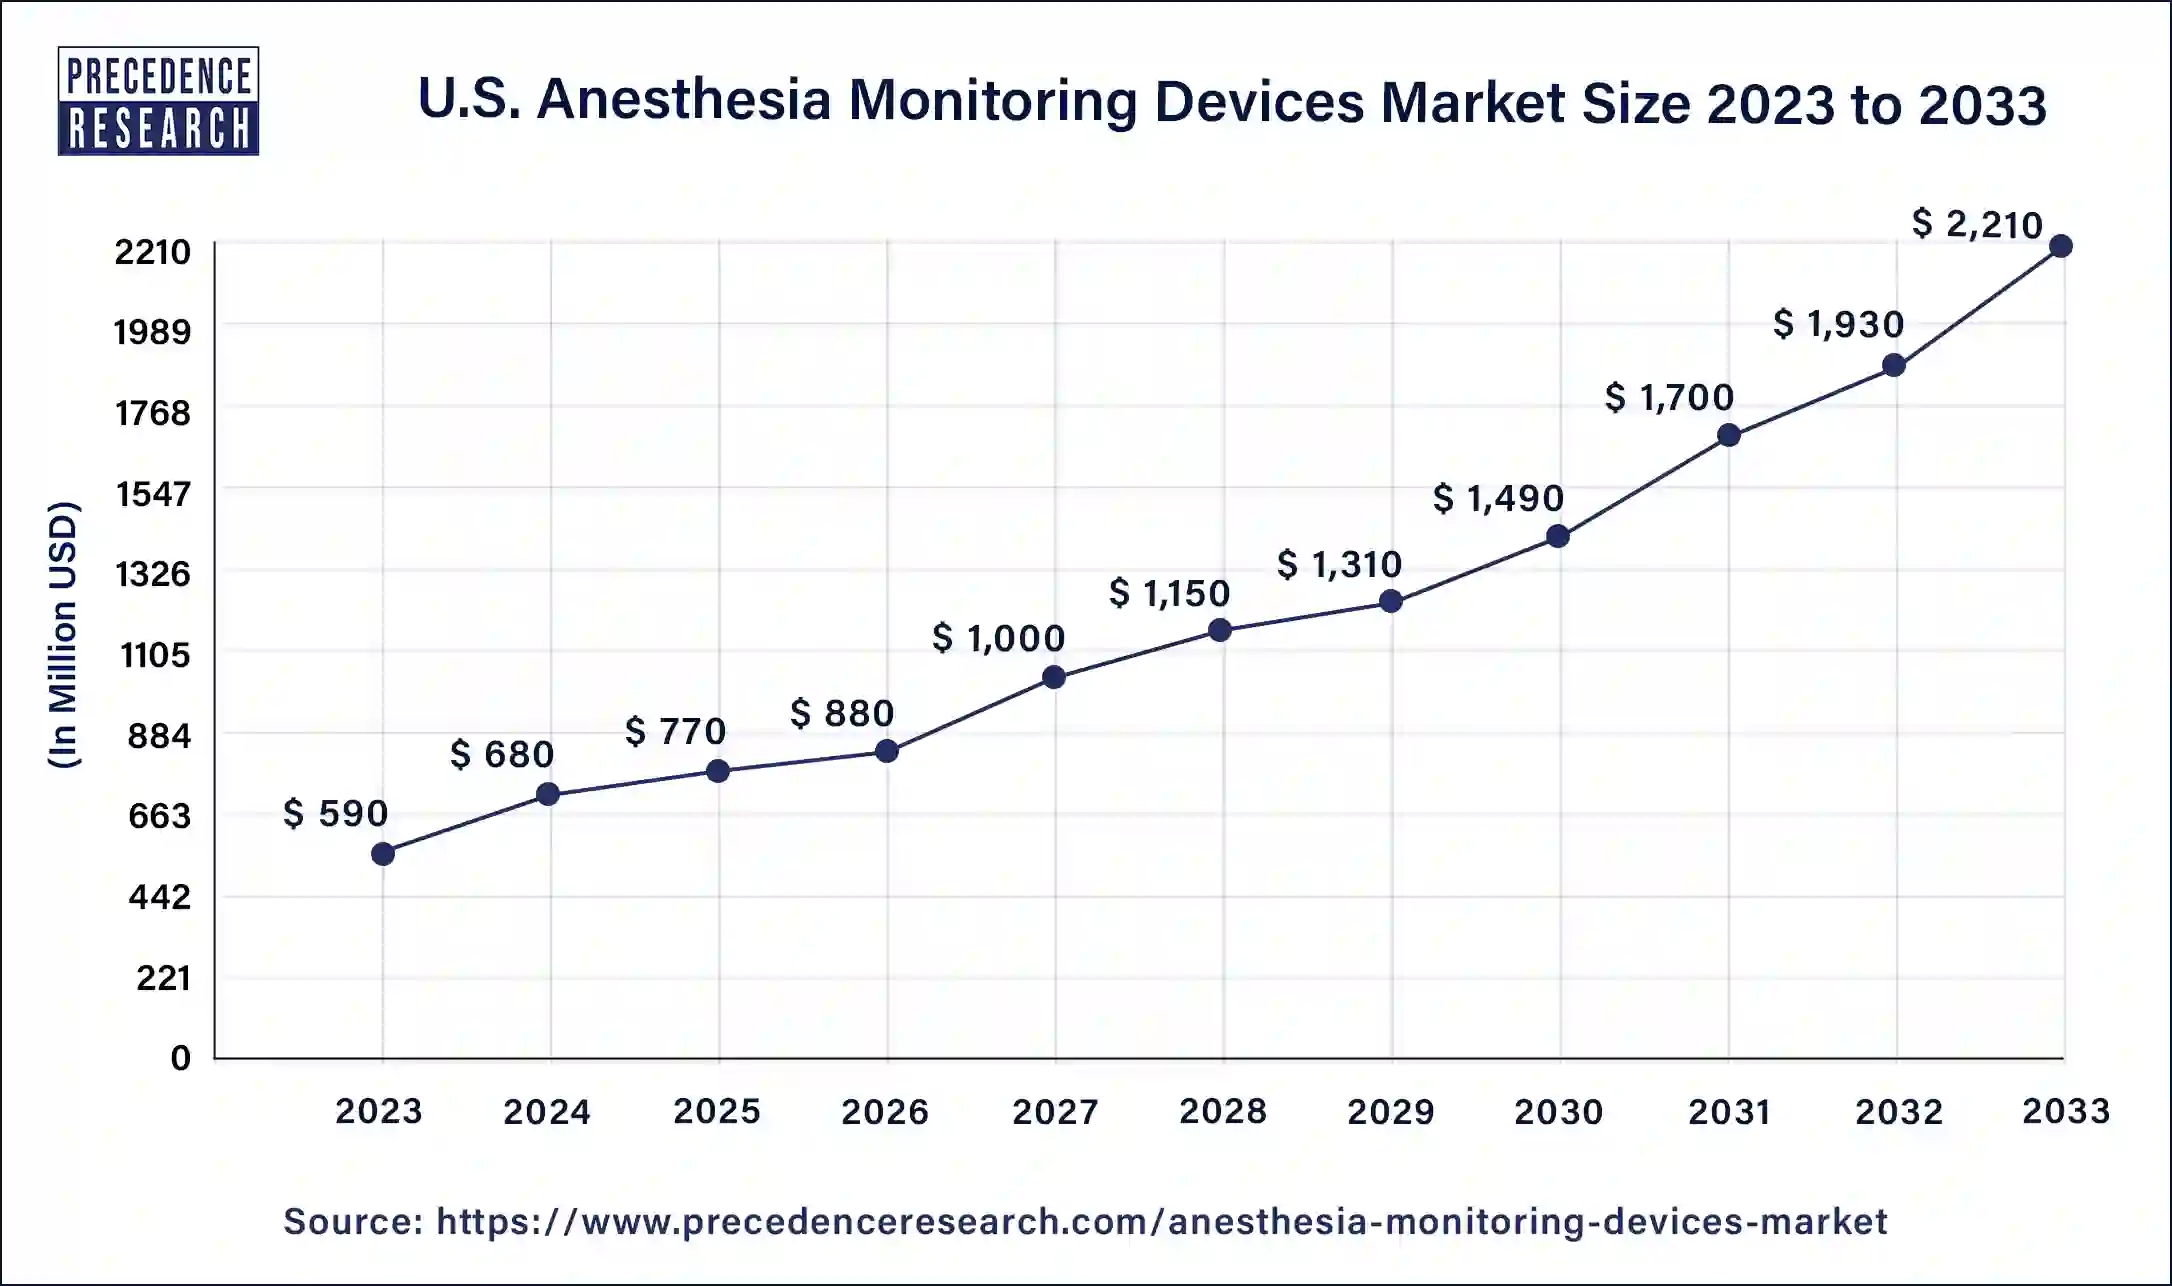 U.S. Anesthesia Monitoring Devices Market Size 2024 to 2033